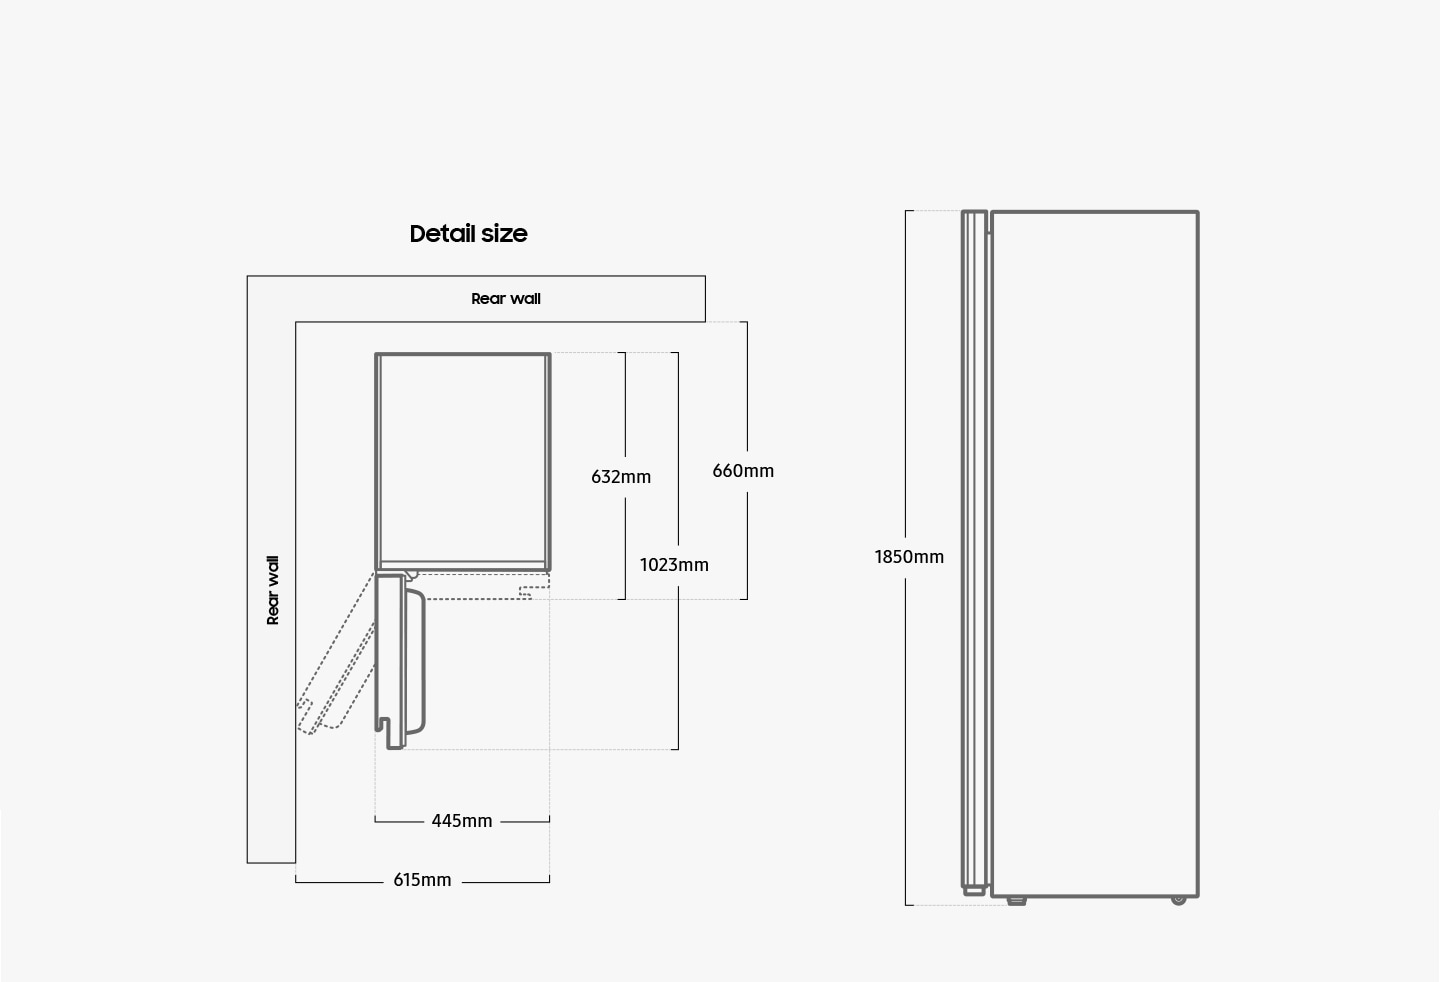 DF8000NM is 1850mm high, 445mm long, and 632mm deep when the door is closed. Including space between the rear wall and the dresser, the depth is 660mm. When the door is 90 degrees open, the total depth is 1023mm, including the door. With the door opened to the max, the length is 615mm measured from the corner without the door.